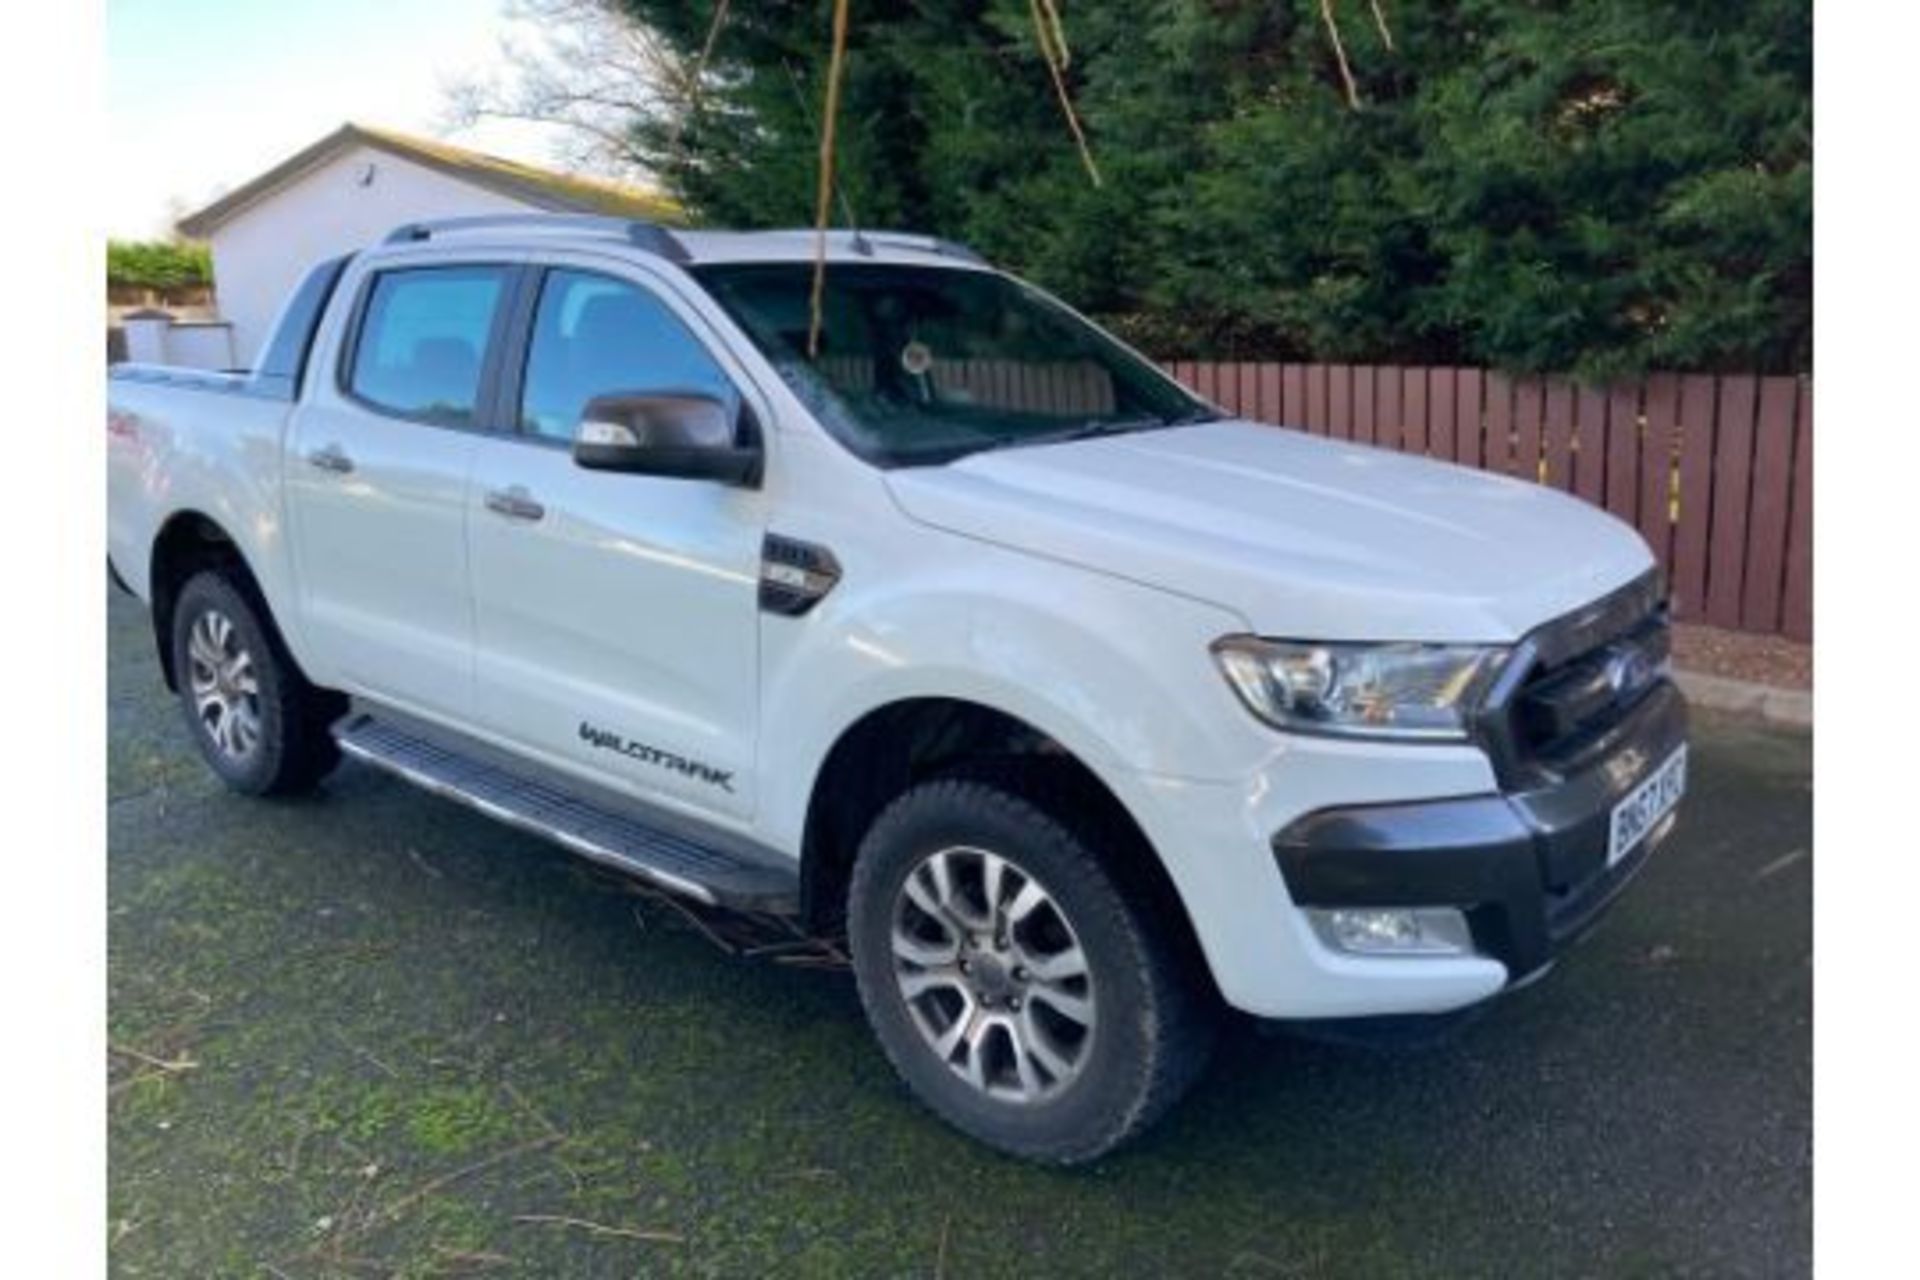 FORD RANGER WILDTRACK 2017ÿ 3.2 DIESEL 113000 MILES MOTD OCT 22.STARTS RUNS AND DRIVES.LOCATED IN